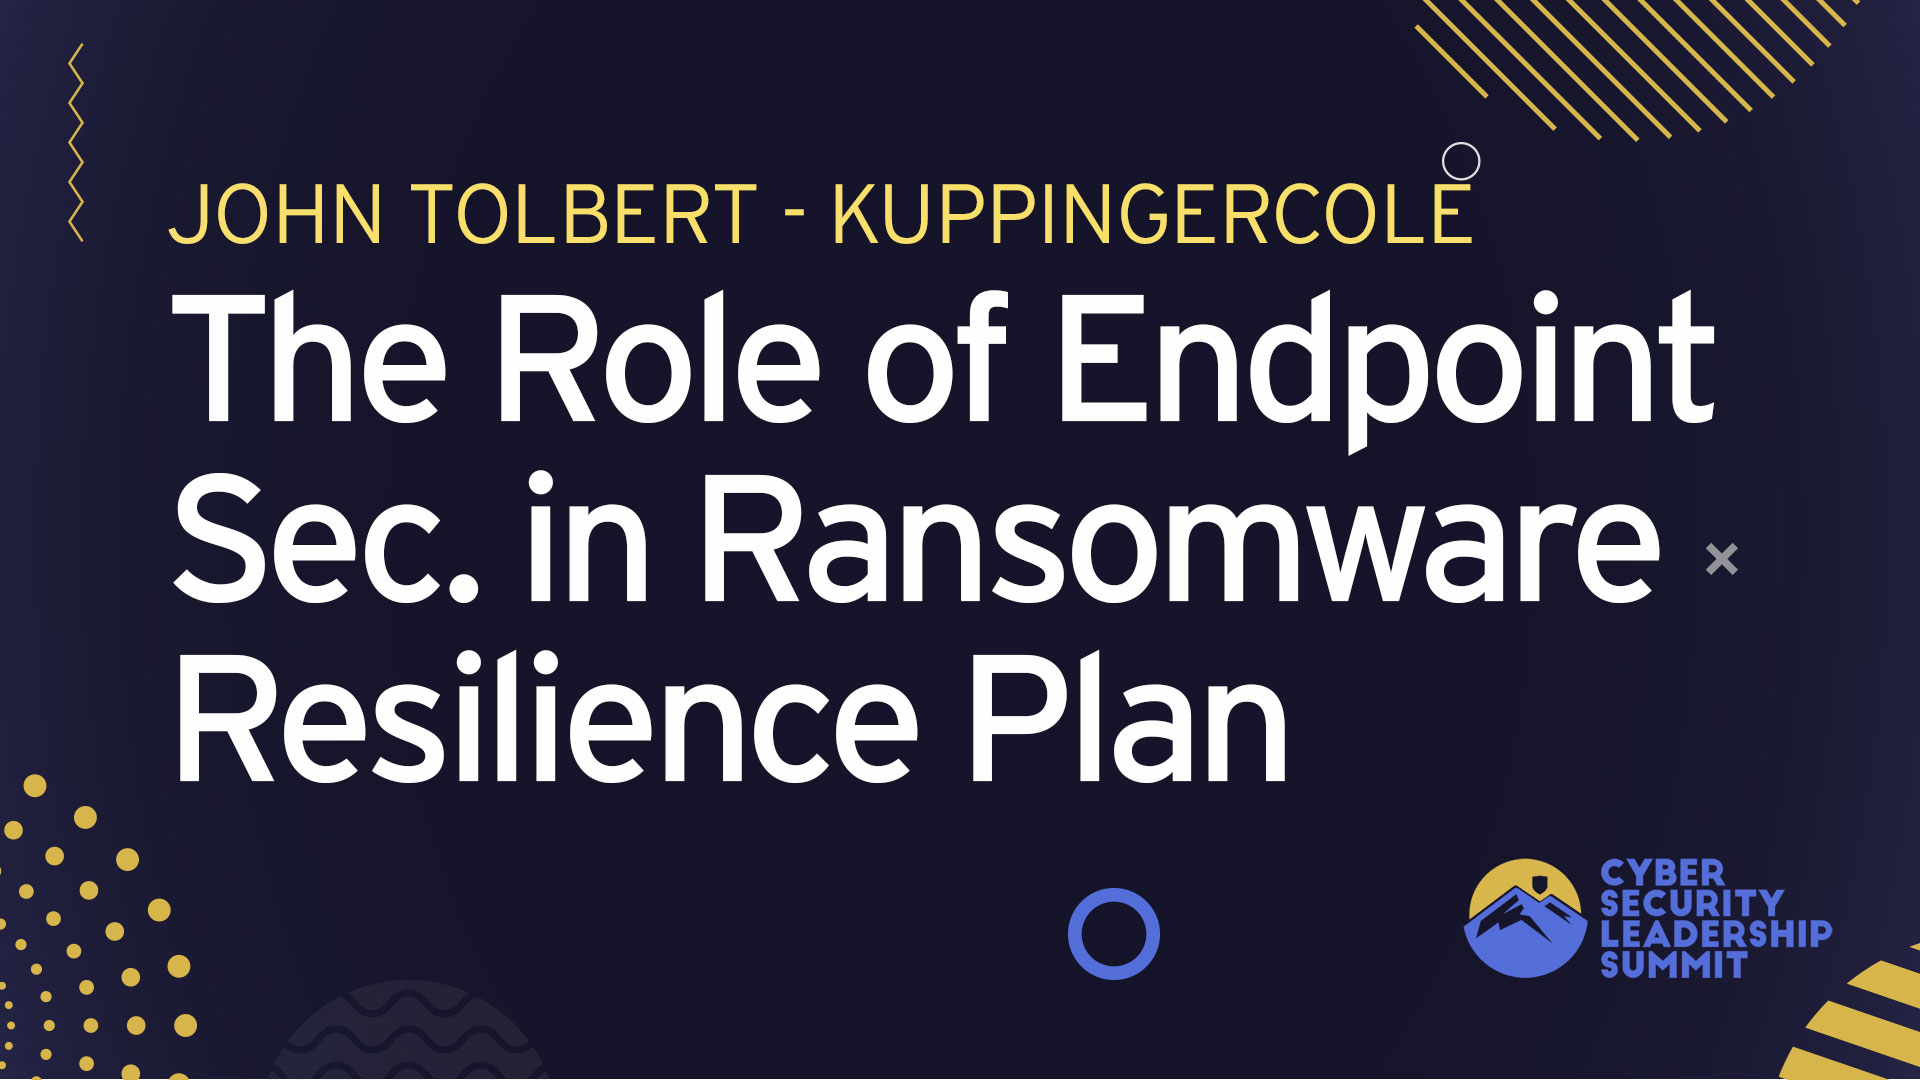 Exploring the role of Endpoint Security in a Ransomware Resilience Plan